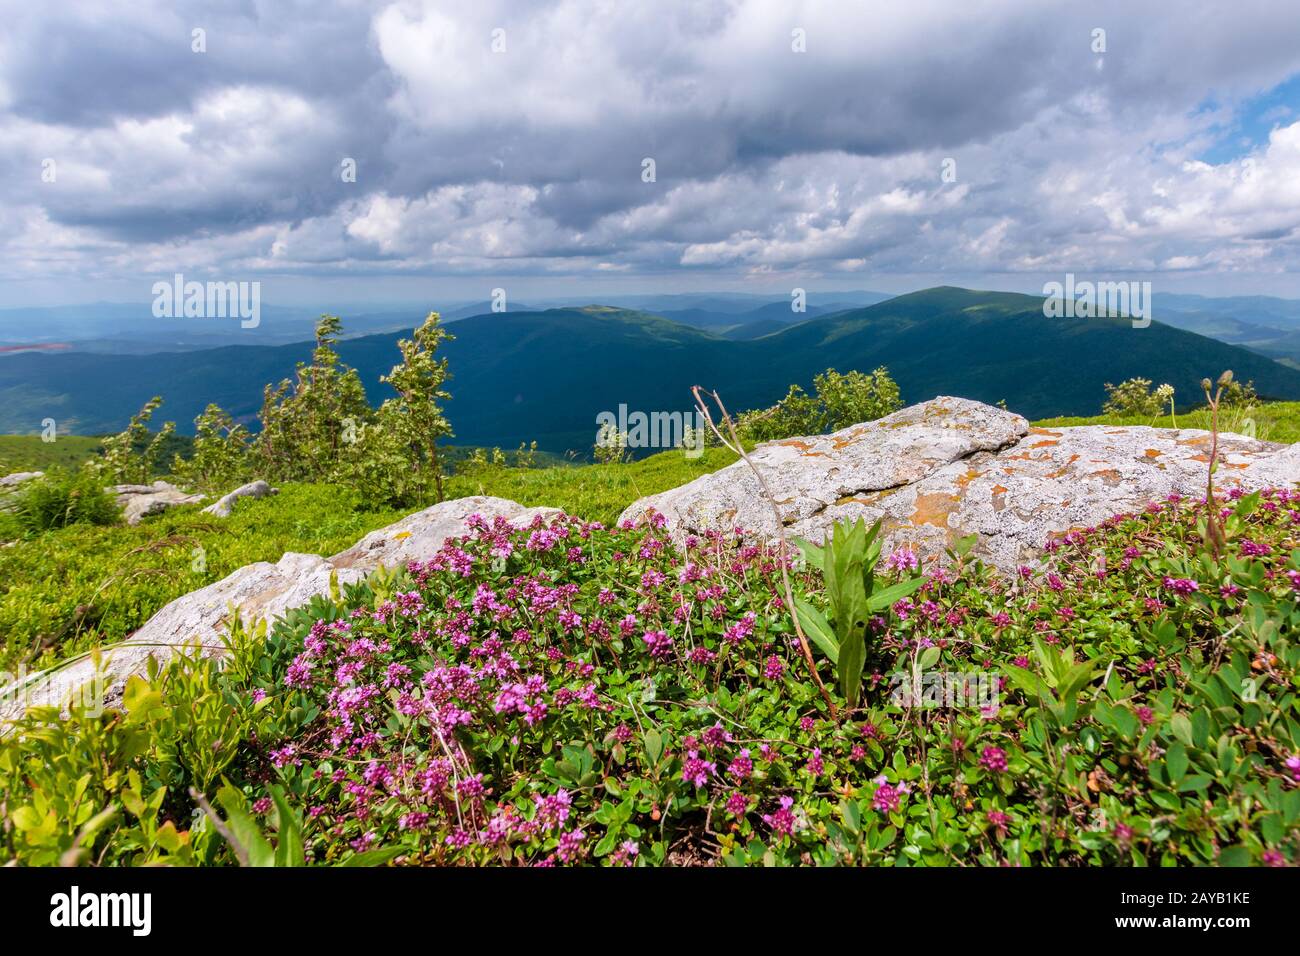 blooming wild herbs on the grassy hill. beautiful nature scenery of alpine meadows in carpathian mountains. summer weather with clouds on the blue sky Stock Photo